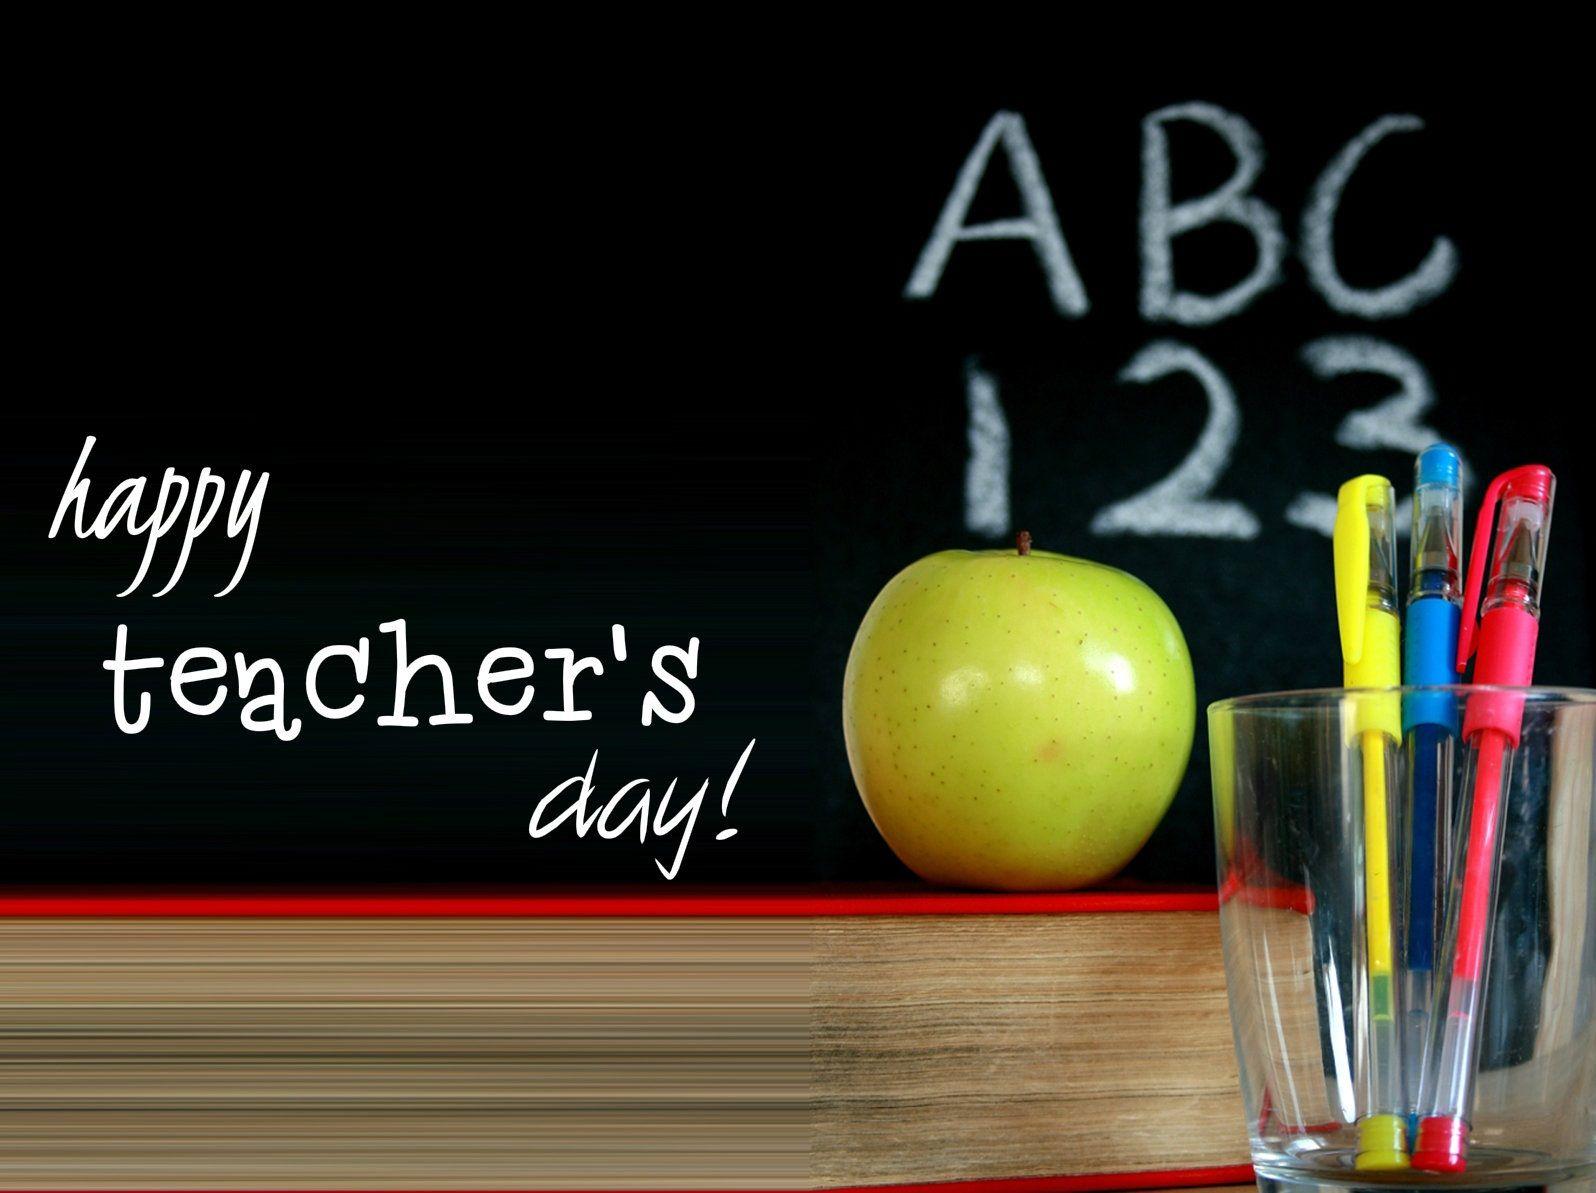 Happy Teachers Day Image, Picture and Wallpaper 2016